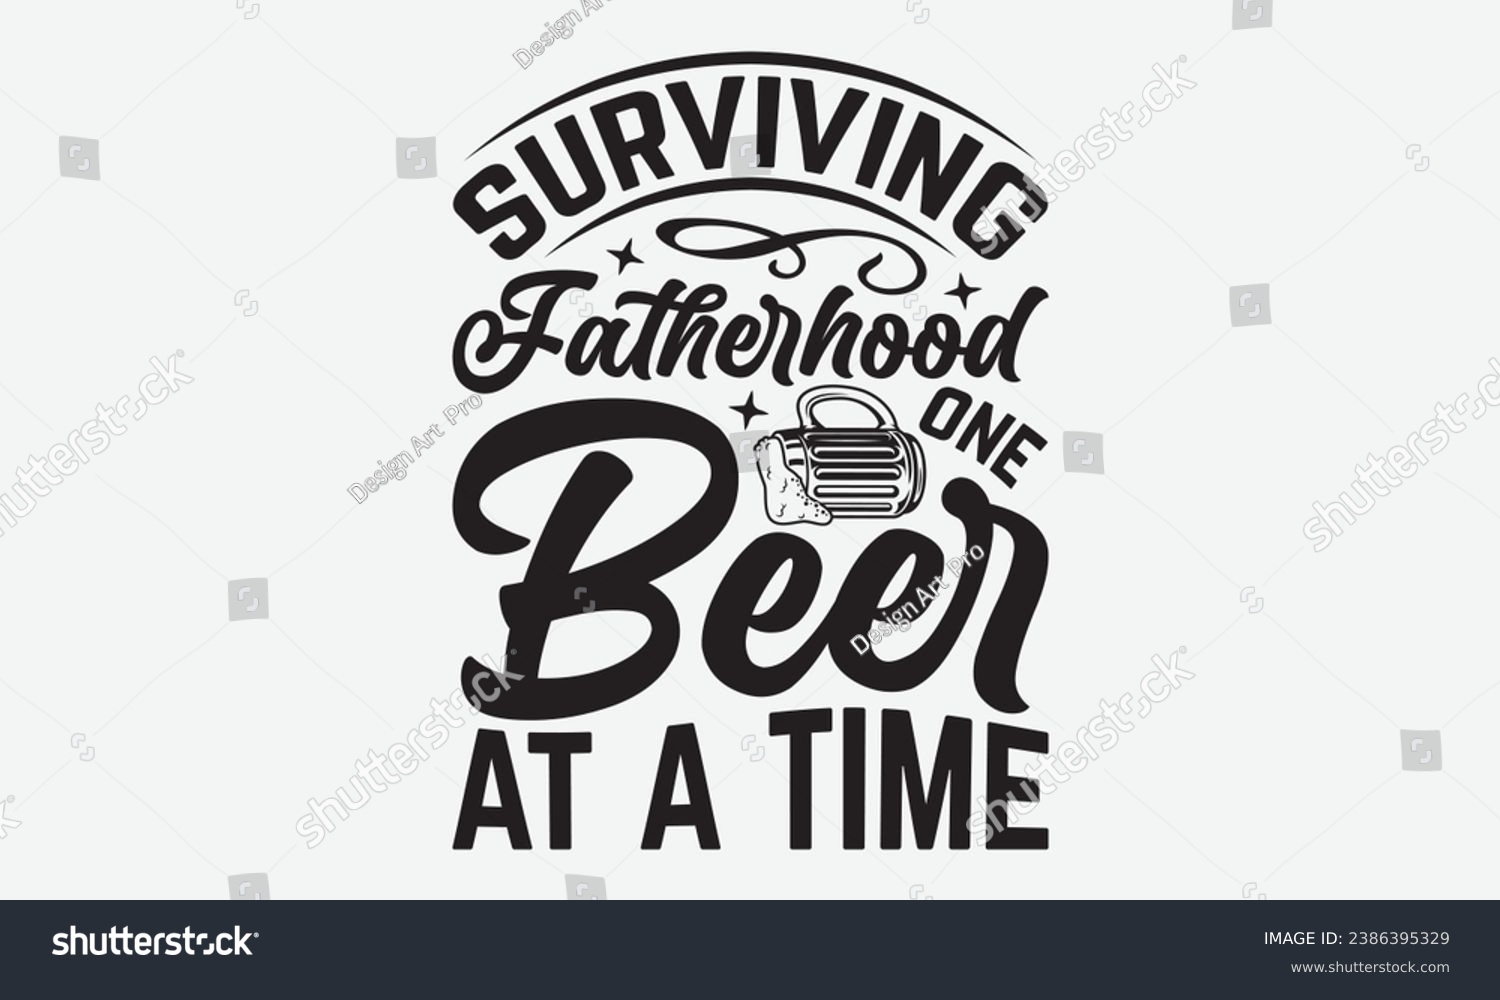 SVG of Surviving Fatherhood One Beer At A Time -Beer T-Shirt Design, Modern Calligraphy Hand Drawn Typography Vector, Illustration For Prints On And Bags, Posters Mugs. svg